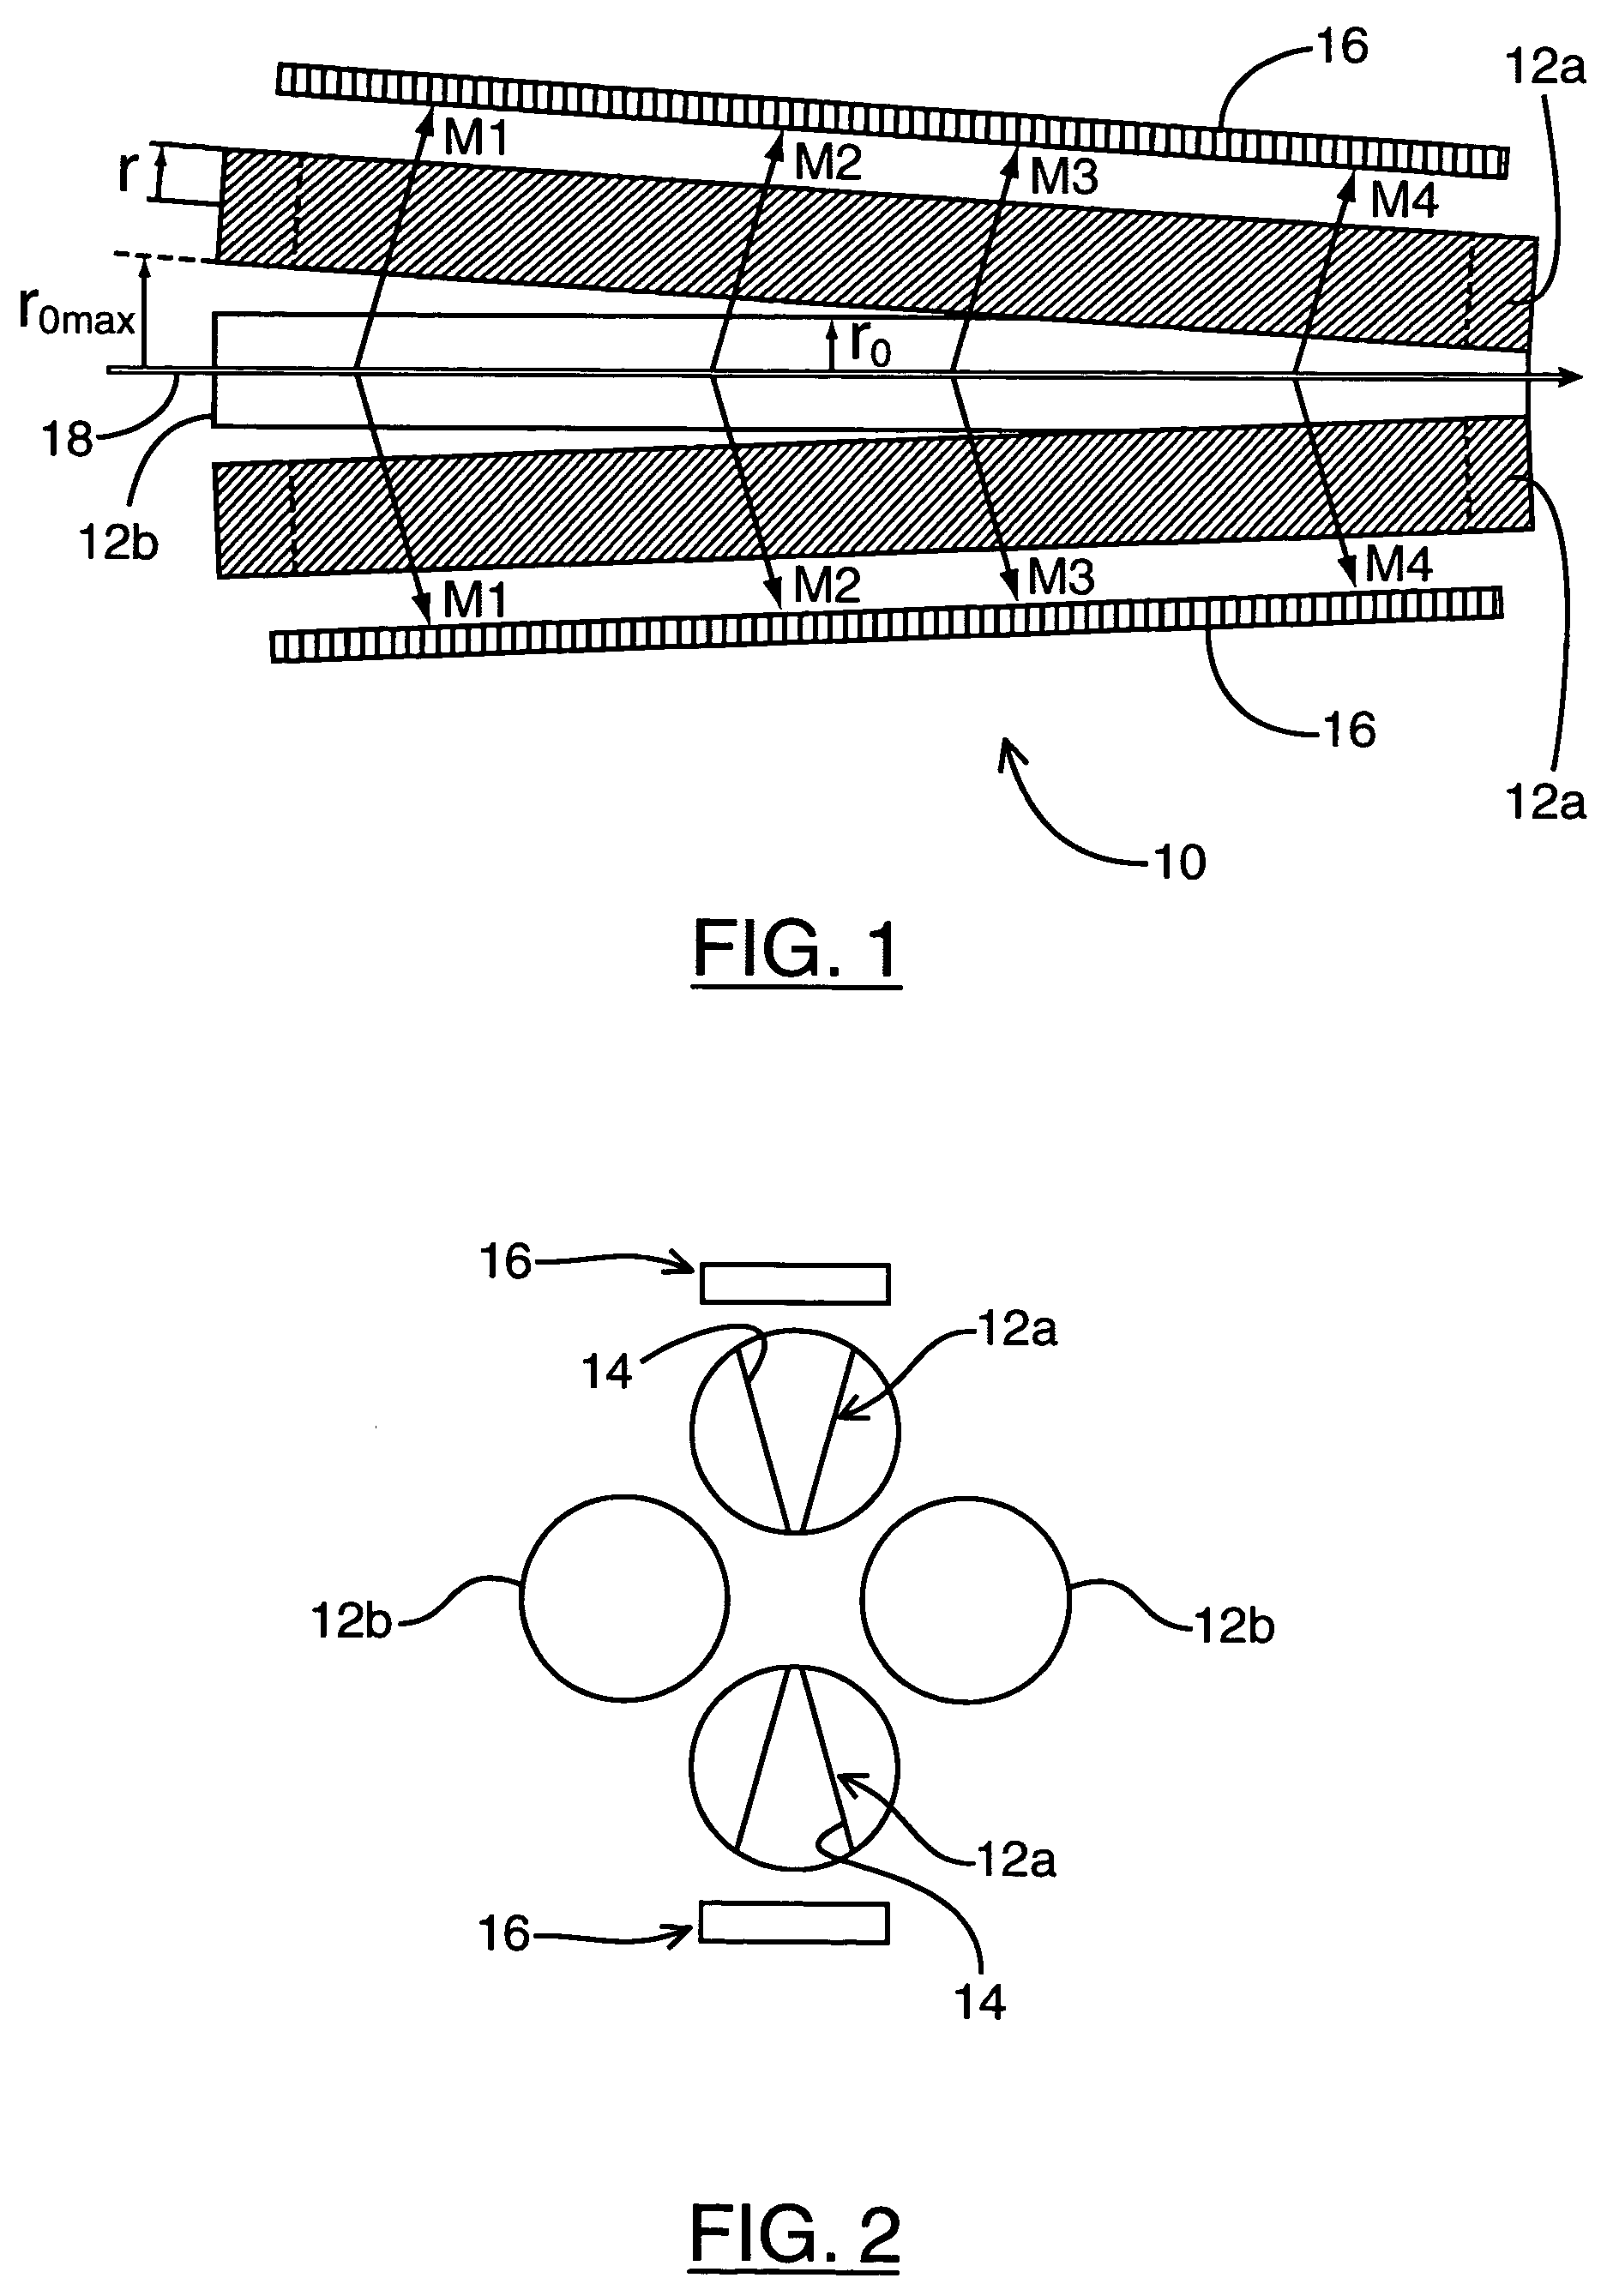 Quadrupole mass spectrometer with spatial dispersion